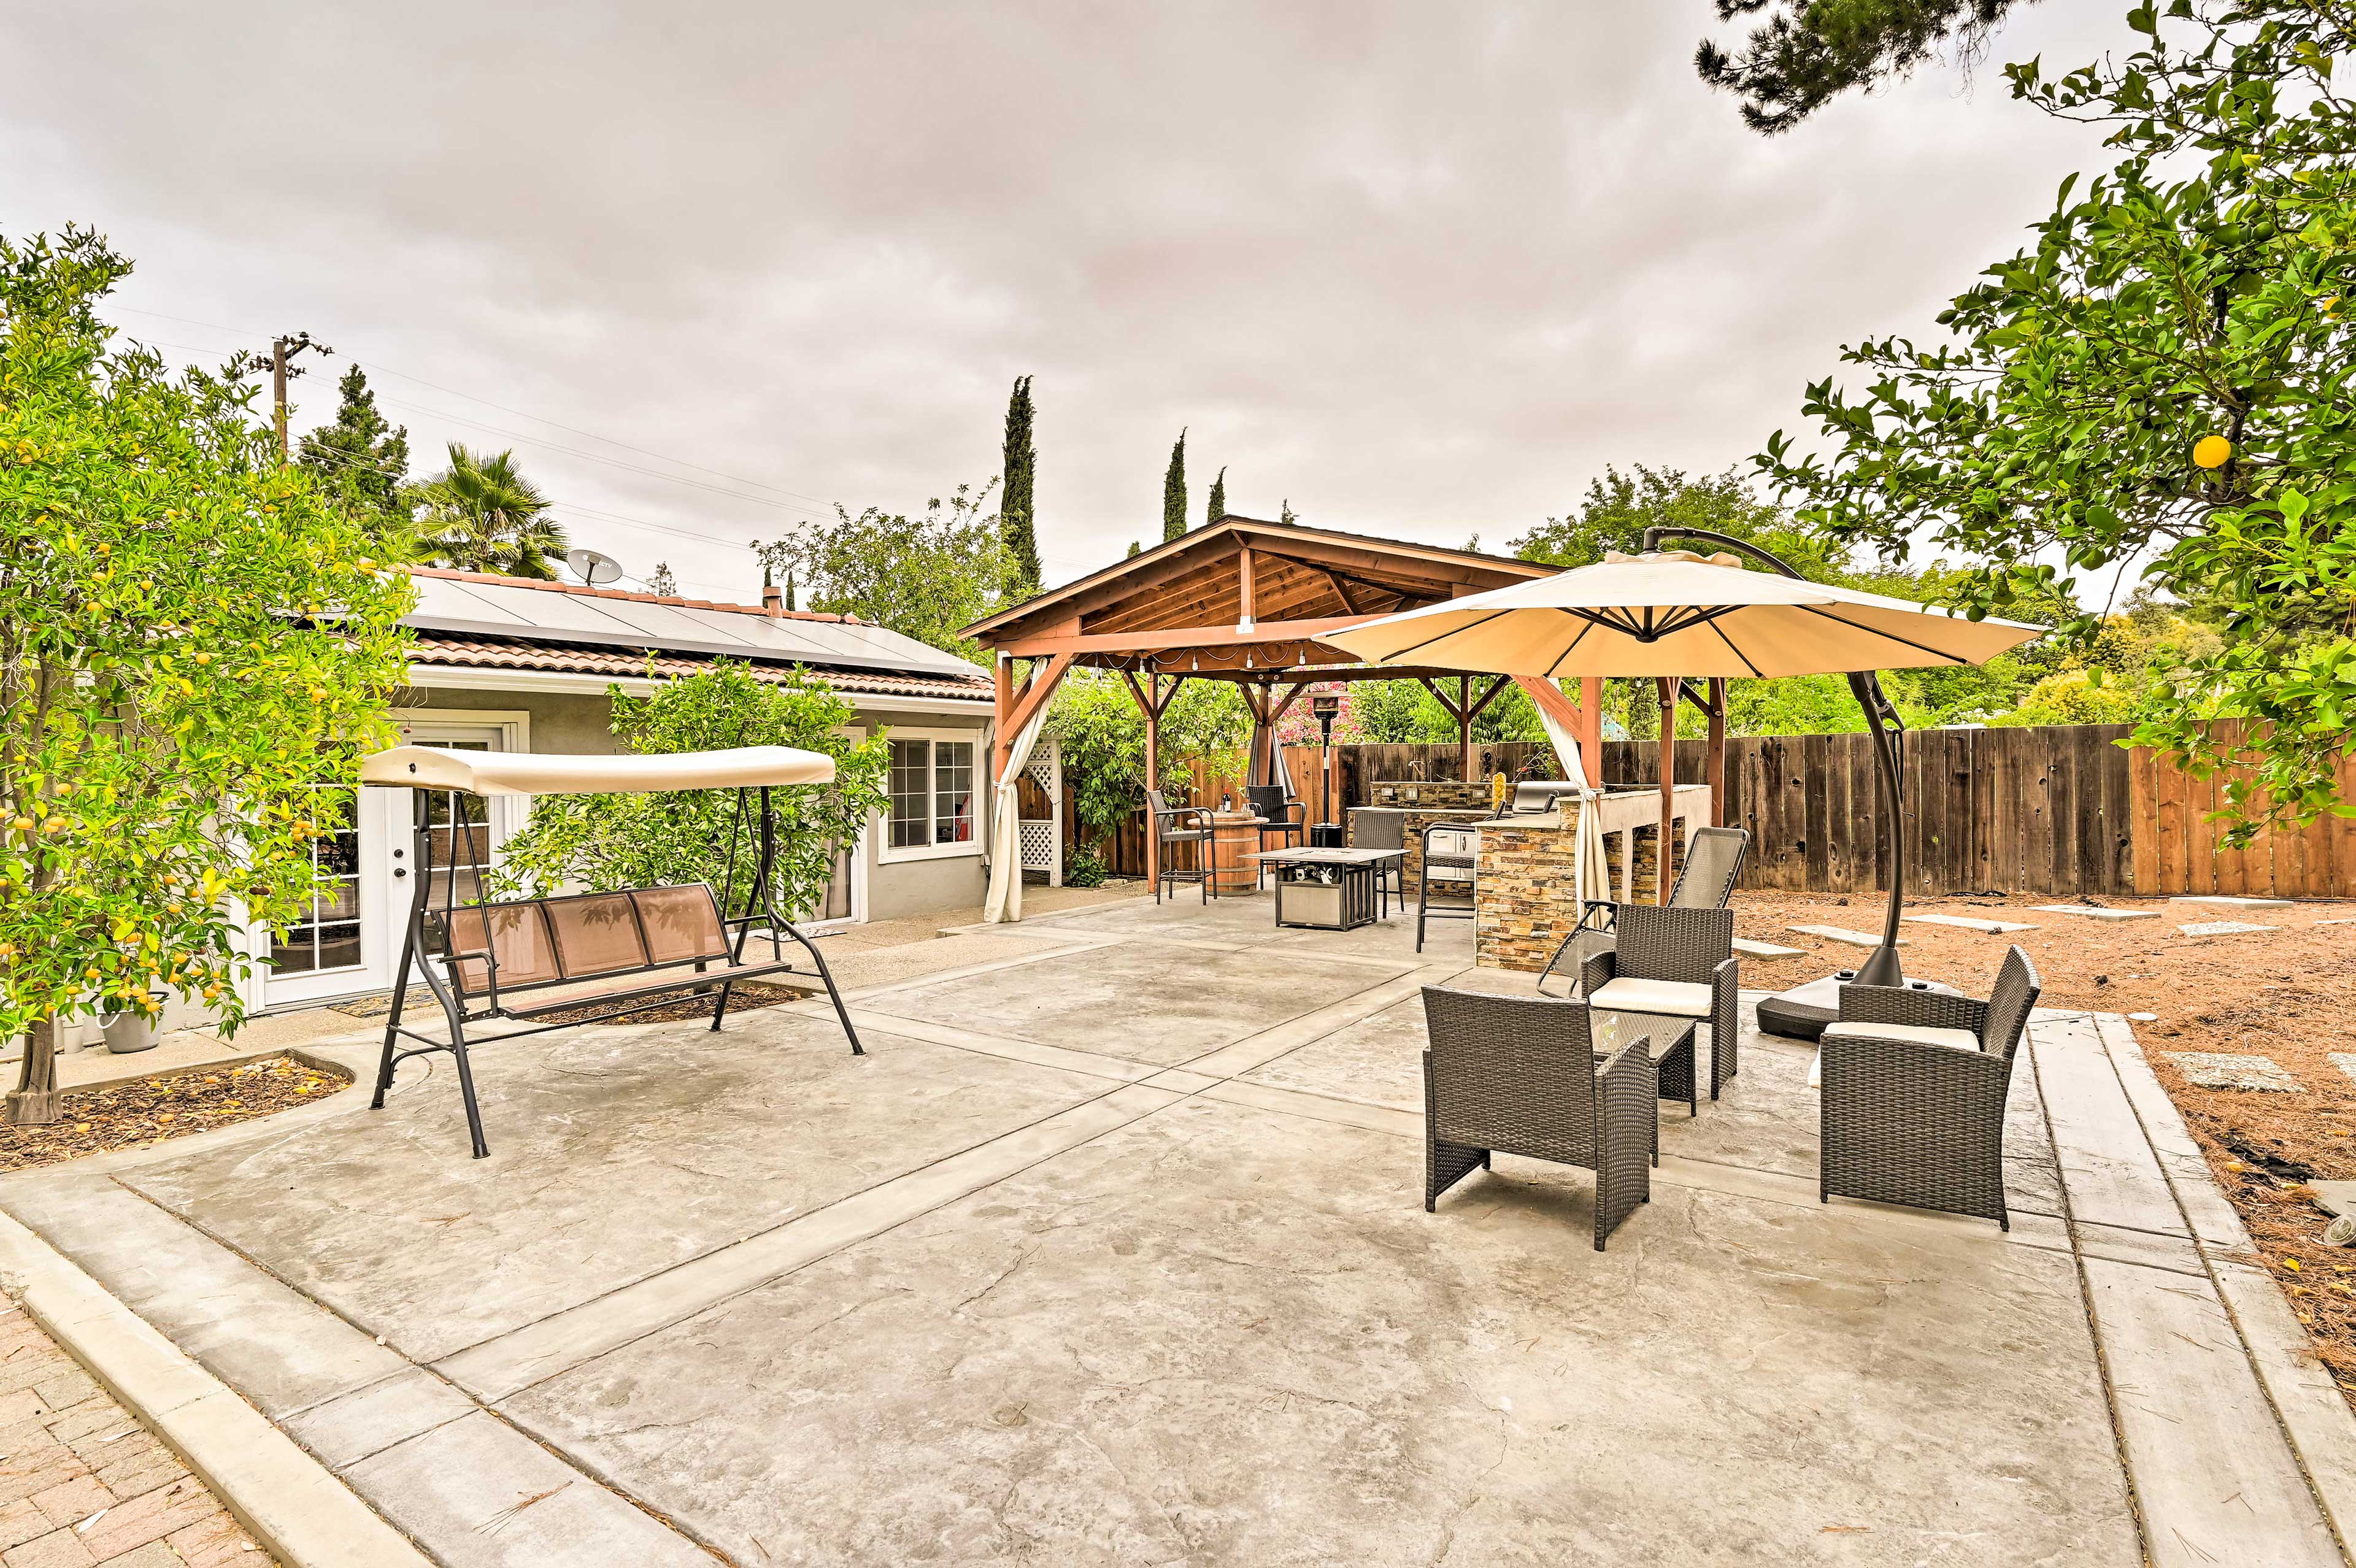 Private Yard | Outdoor Seating Areas | Outdoor Kitchen | Hot Tub | Gas Grill